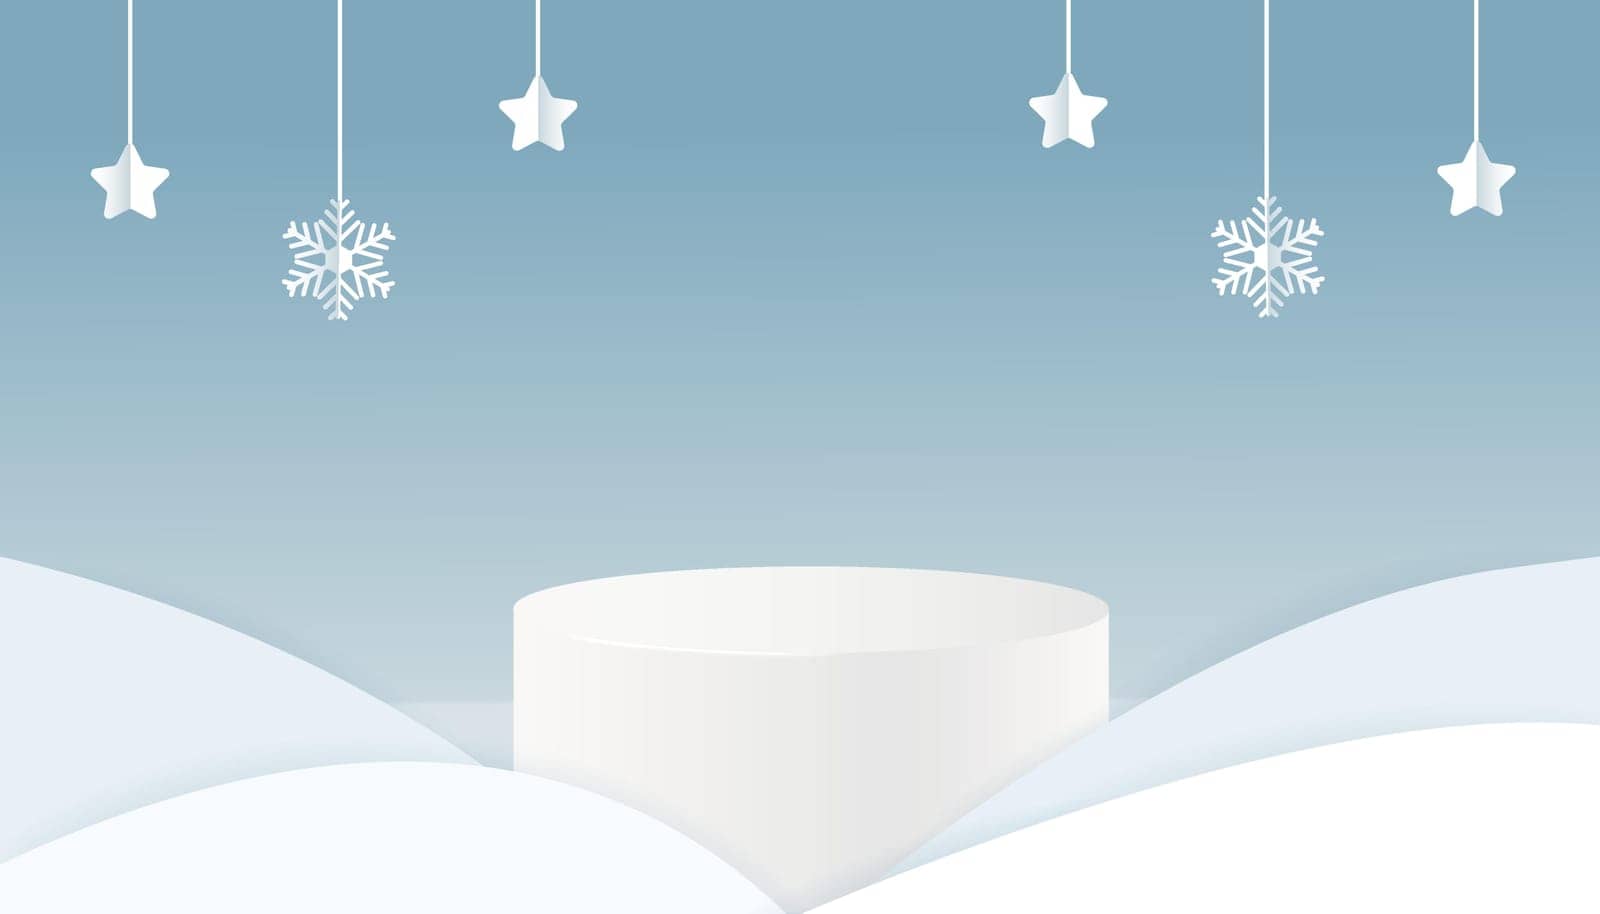 Christmas Winter landscape with snow drifts and product podium scene. Paper cut snow background. Vector illustration by Vovmar